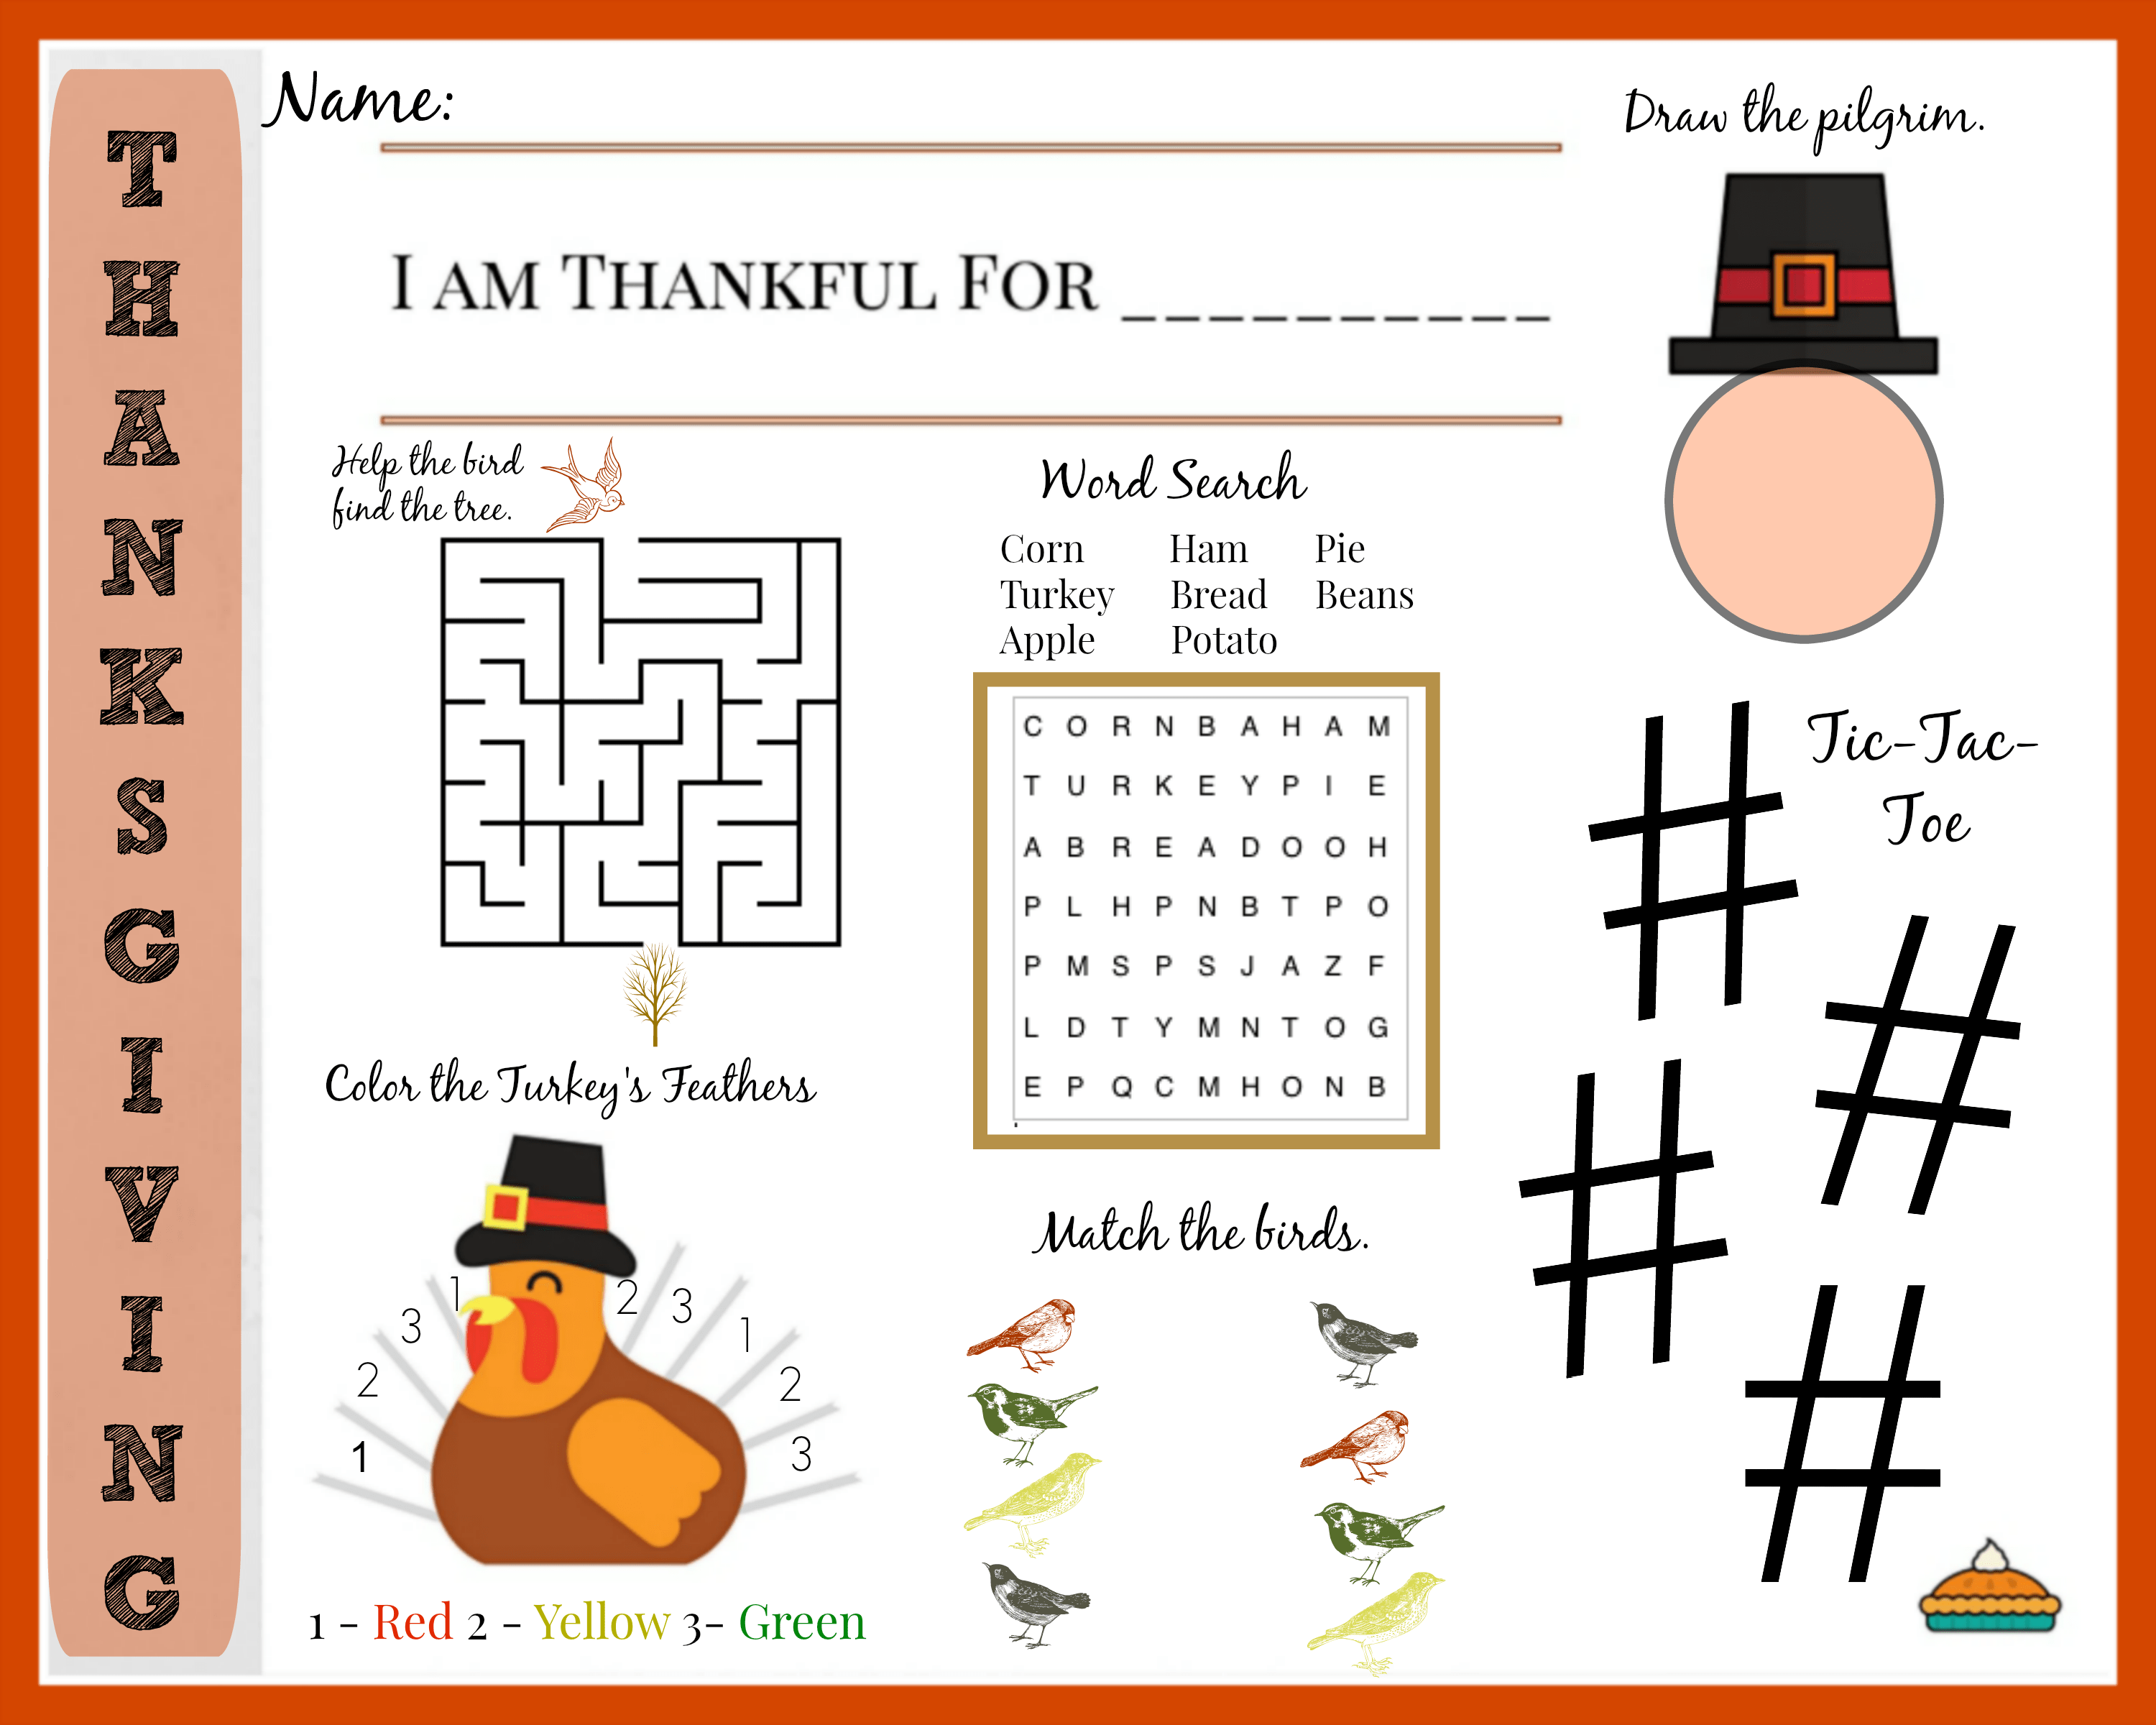 Printable Thanksgiving Placemat for Kids with Fun Ideas for a Kids Table